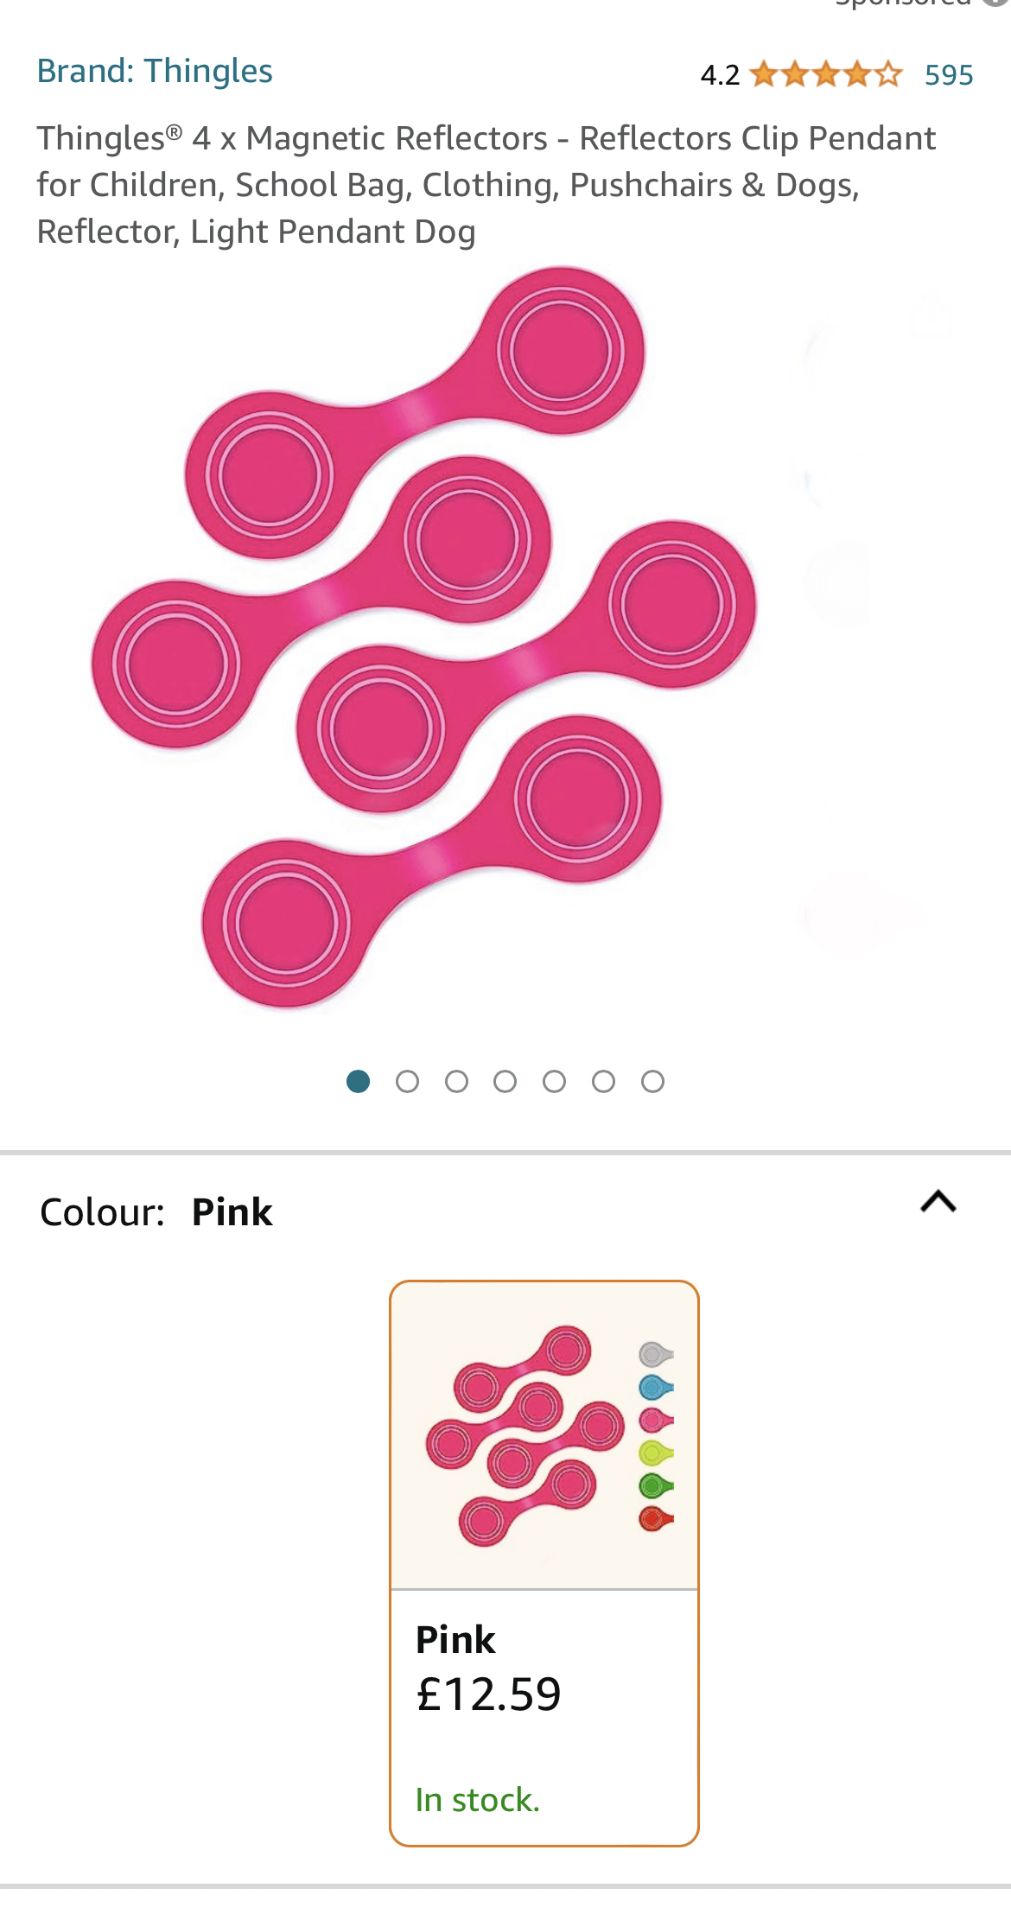 25 x Thingles Pink 4 Pack of Magnetic Reflectors for Children, School Bag, Bike etc - RRP £199.75! - Image 2 of 9